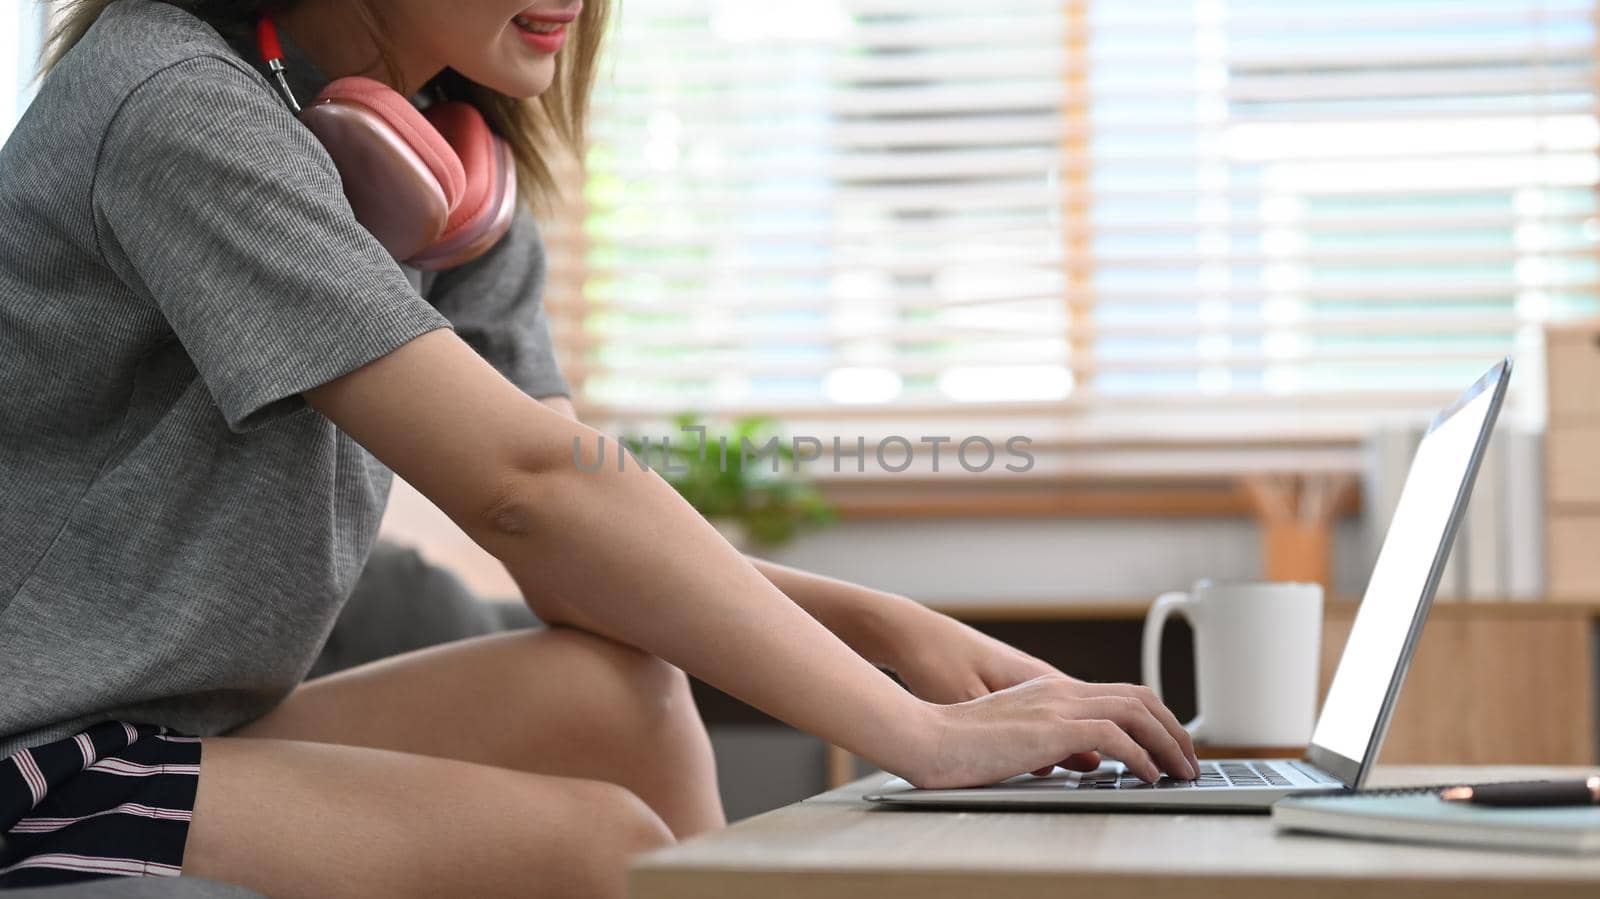 Cropped view of woman in casual clothes sitting on couch and using laptop, spending time on weekend by prathanchorruangsak